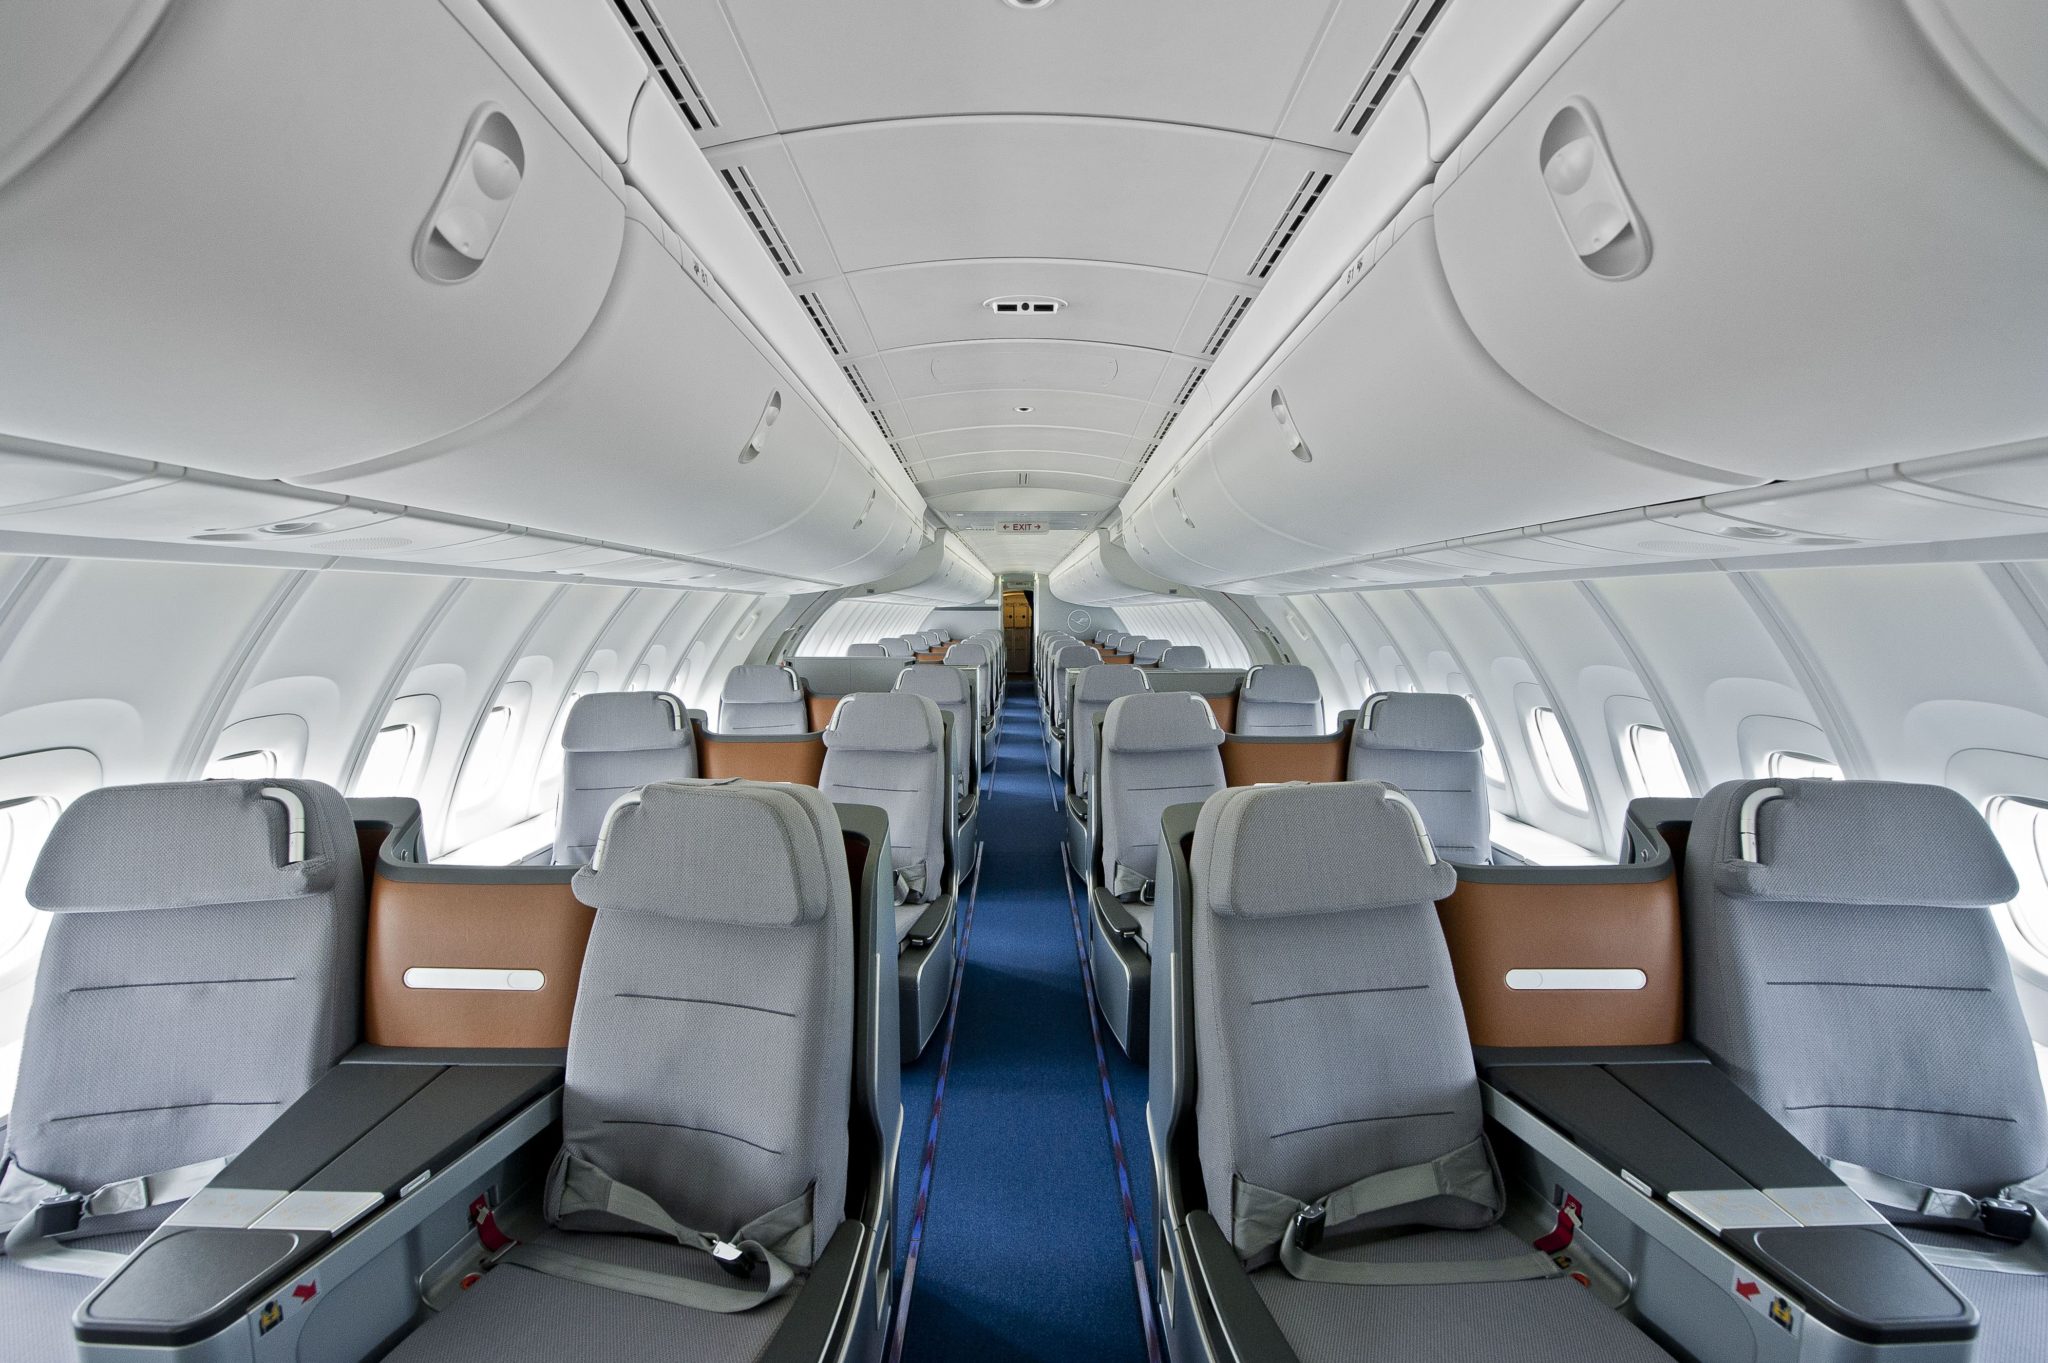 Lufthansa business class on the 747-8 is found upstairs and in the main body. Image: Lufthansa